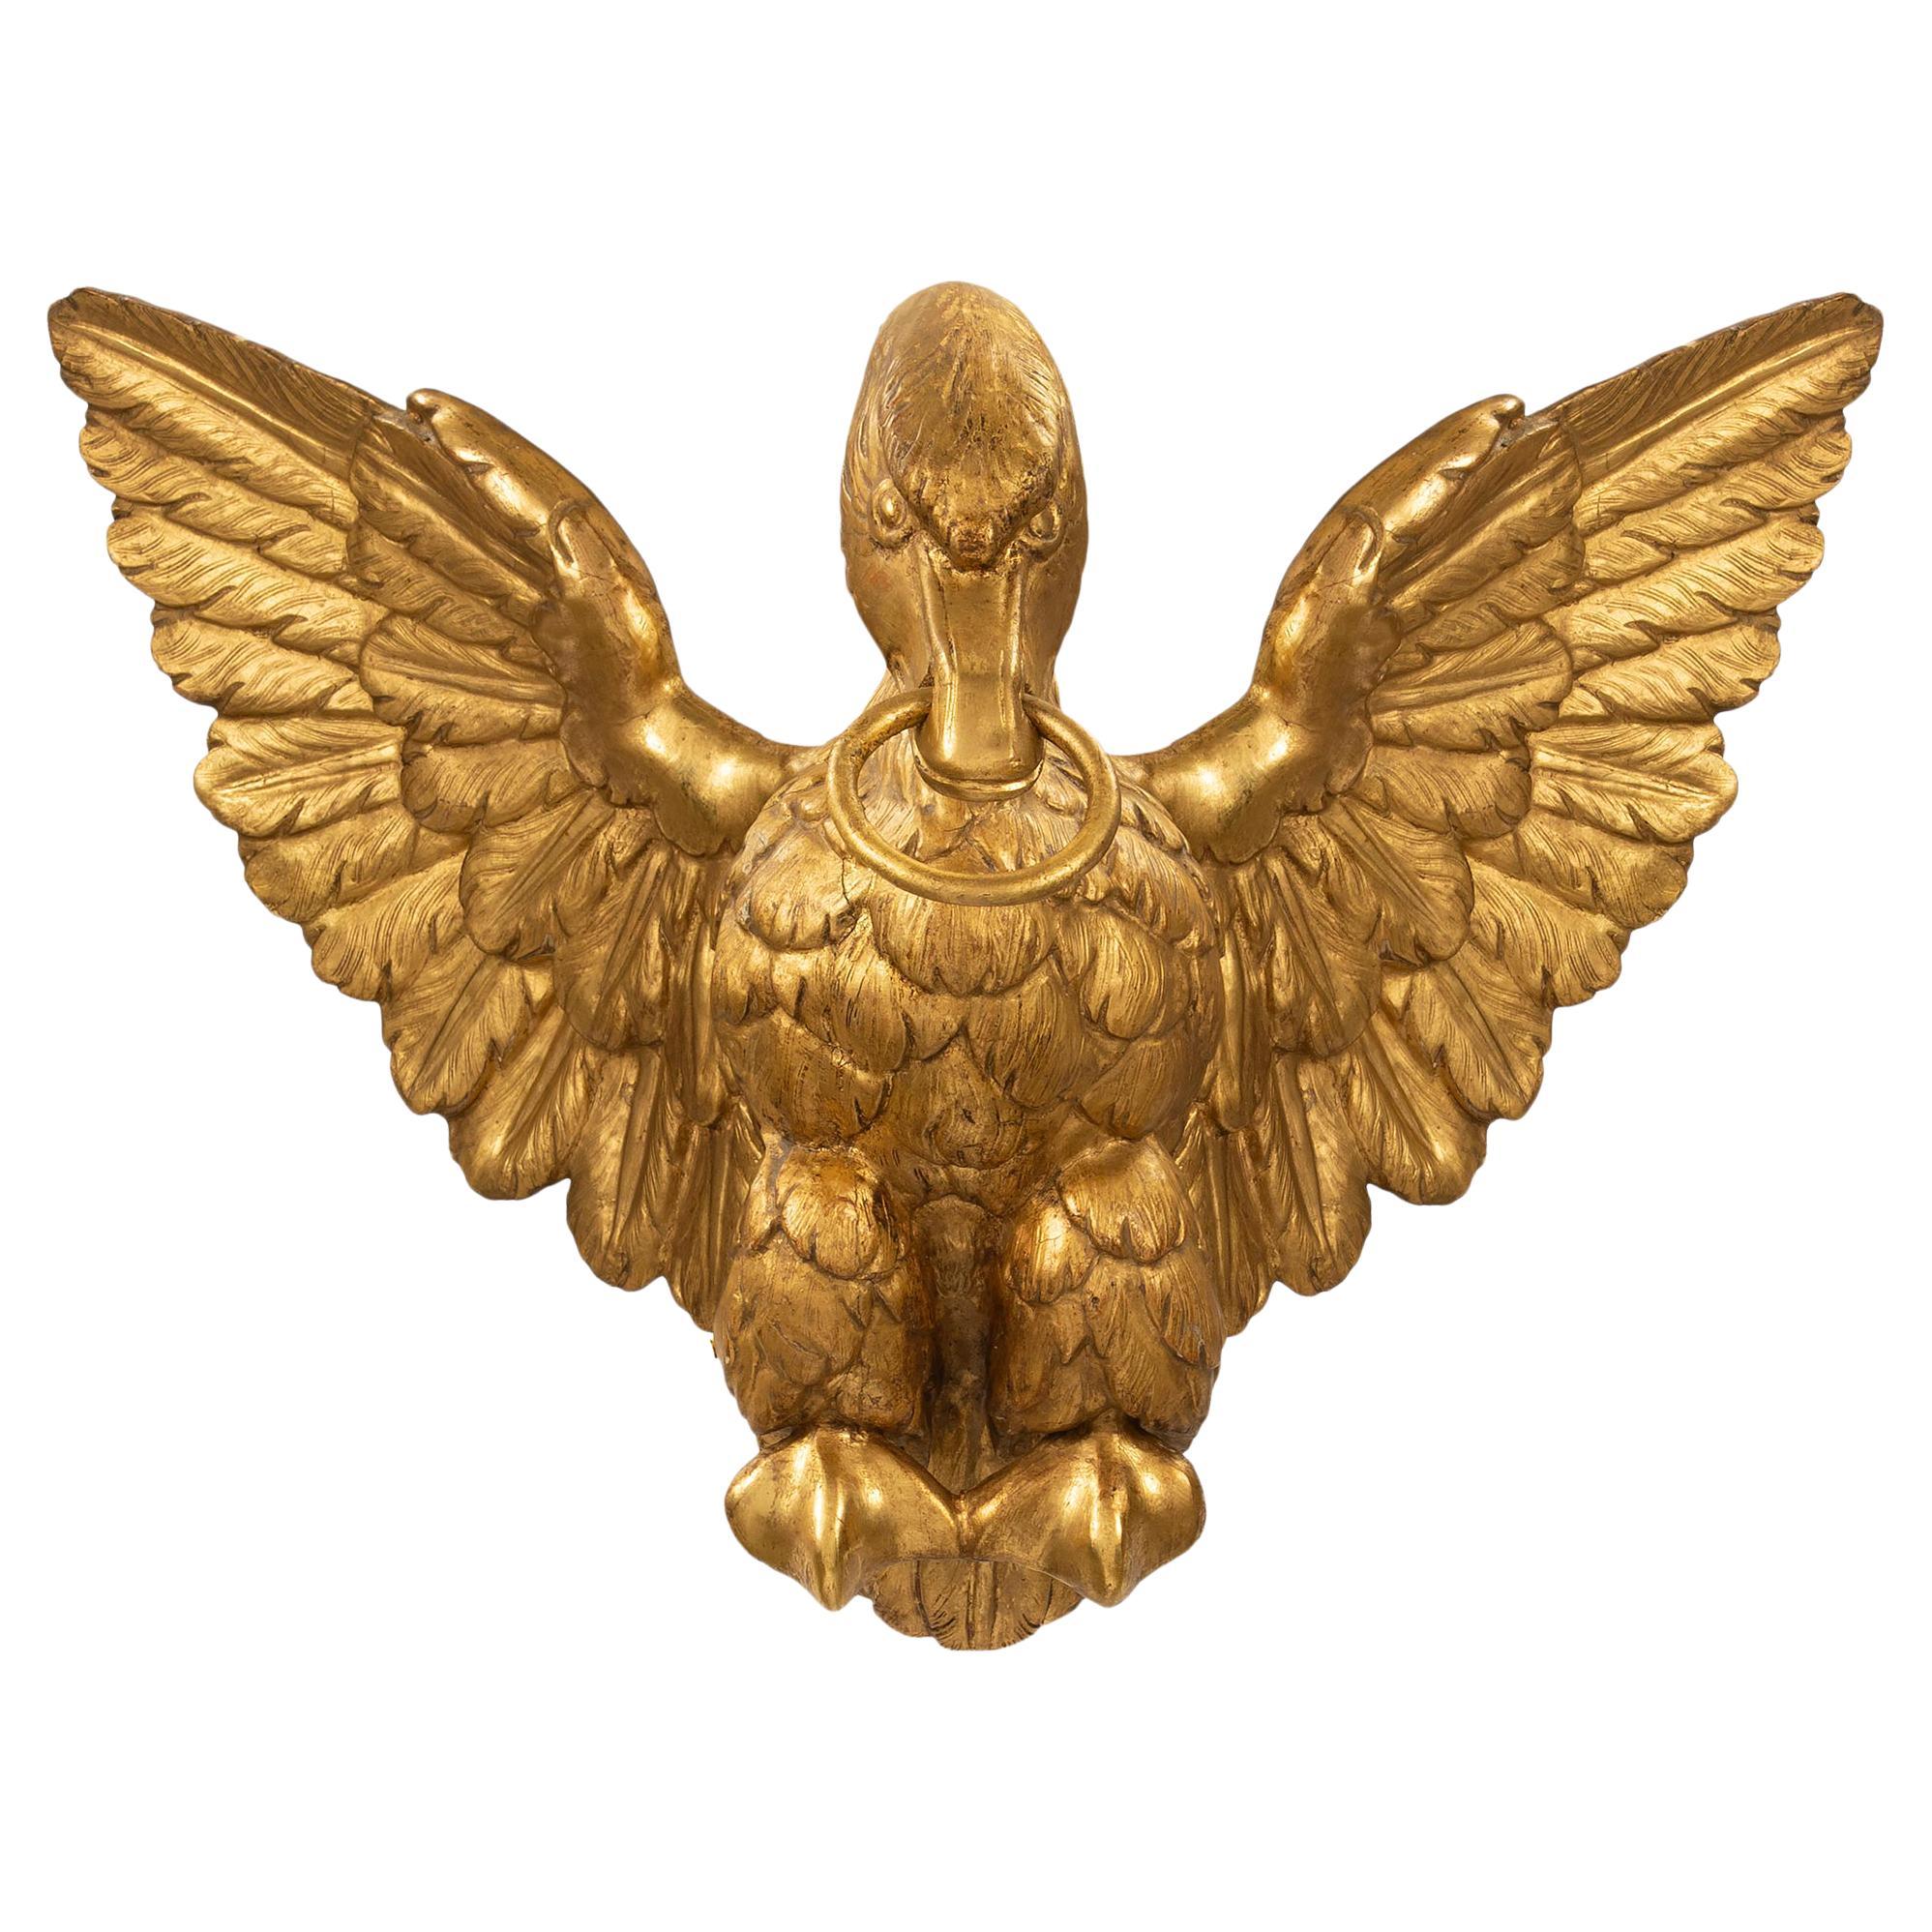 Italian Mid-18th Century Louis XVI Period Wall Mounted Open Winged Giltwood Swan For Sale